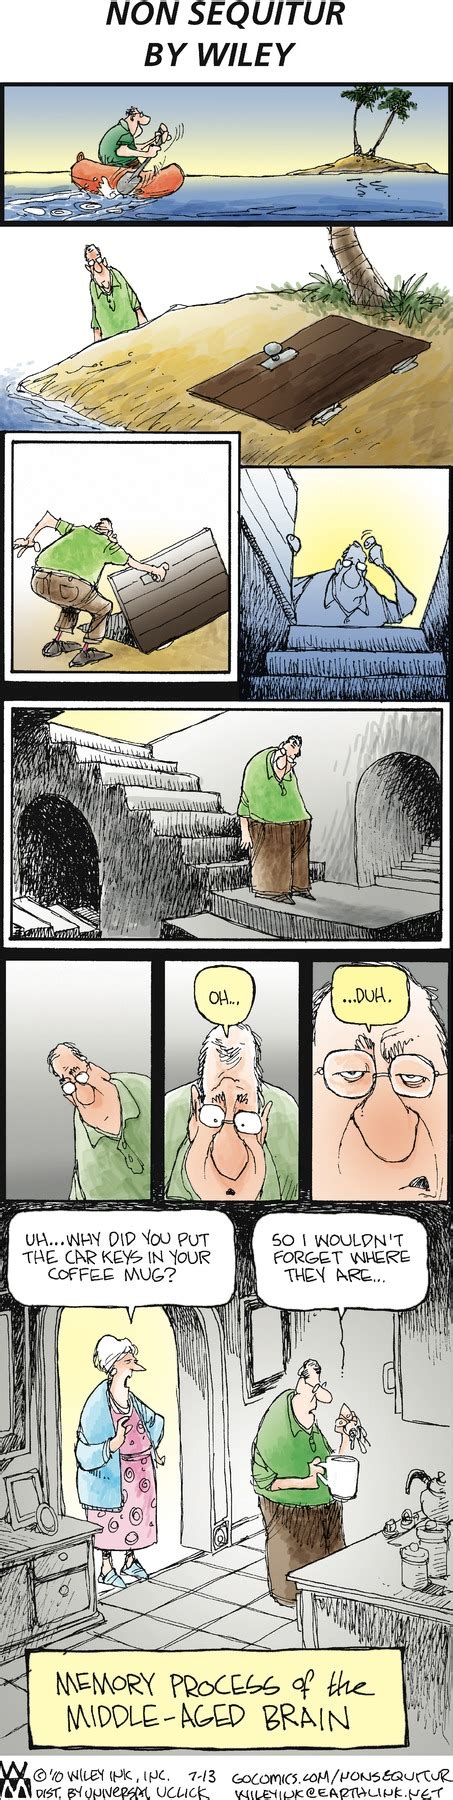 Non sequitur today. Take It From The Tinkersons. The Argyle Sweater. The Barn. The Fortune Teller. The Lockhorns. The Pajama Diaries. Wallace The Brave. Wizard of Id. Working it Out. 